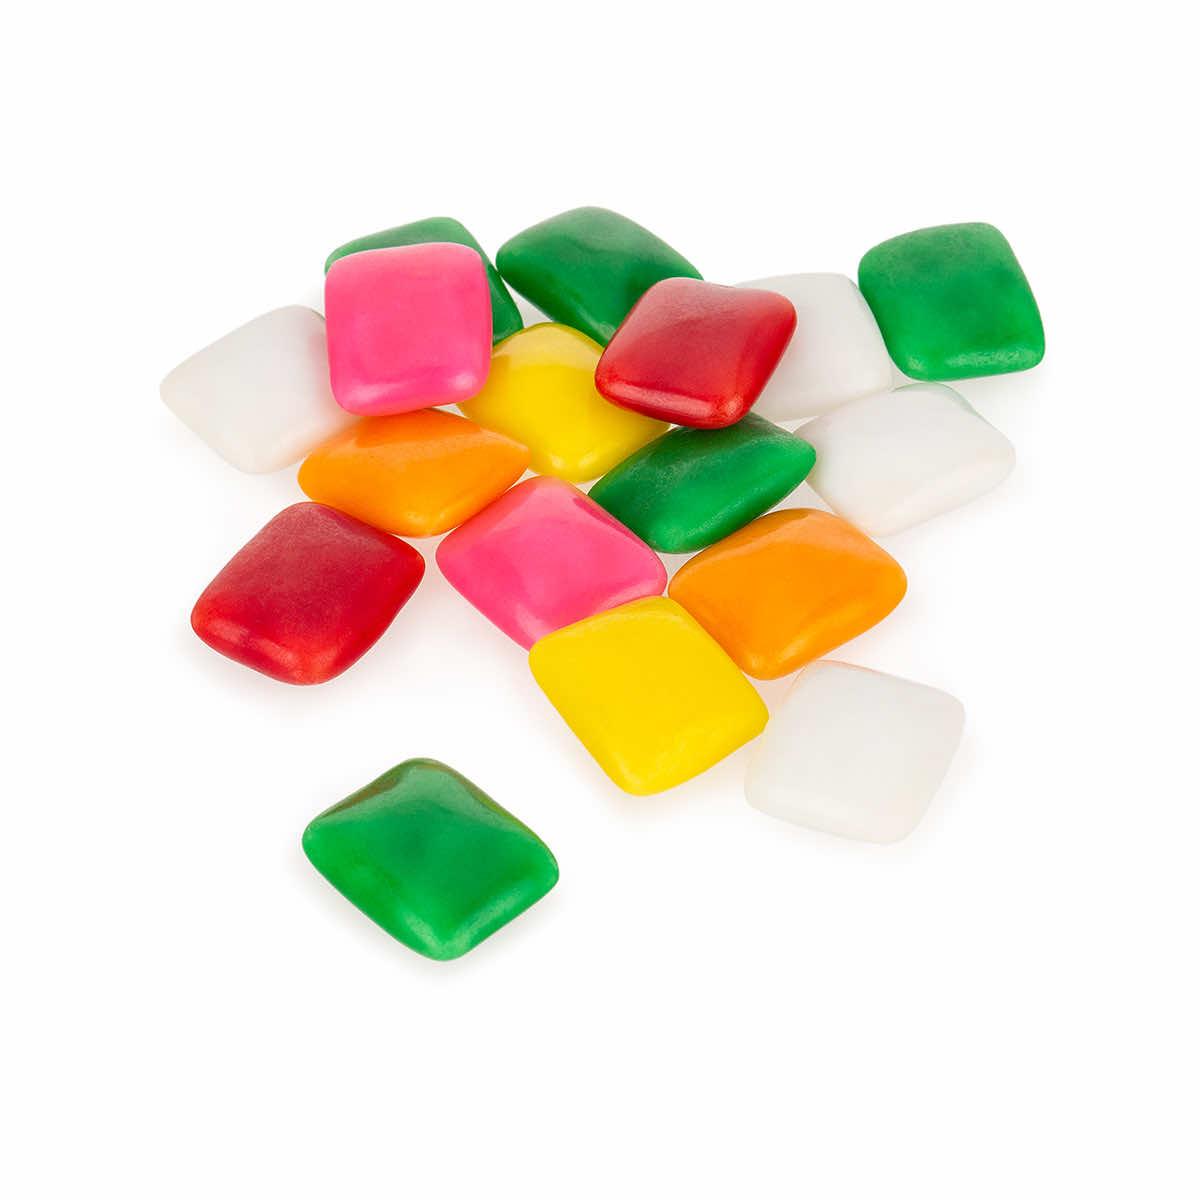  Assorted Chiclets Candy - 1 Lb.